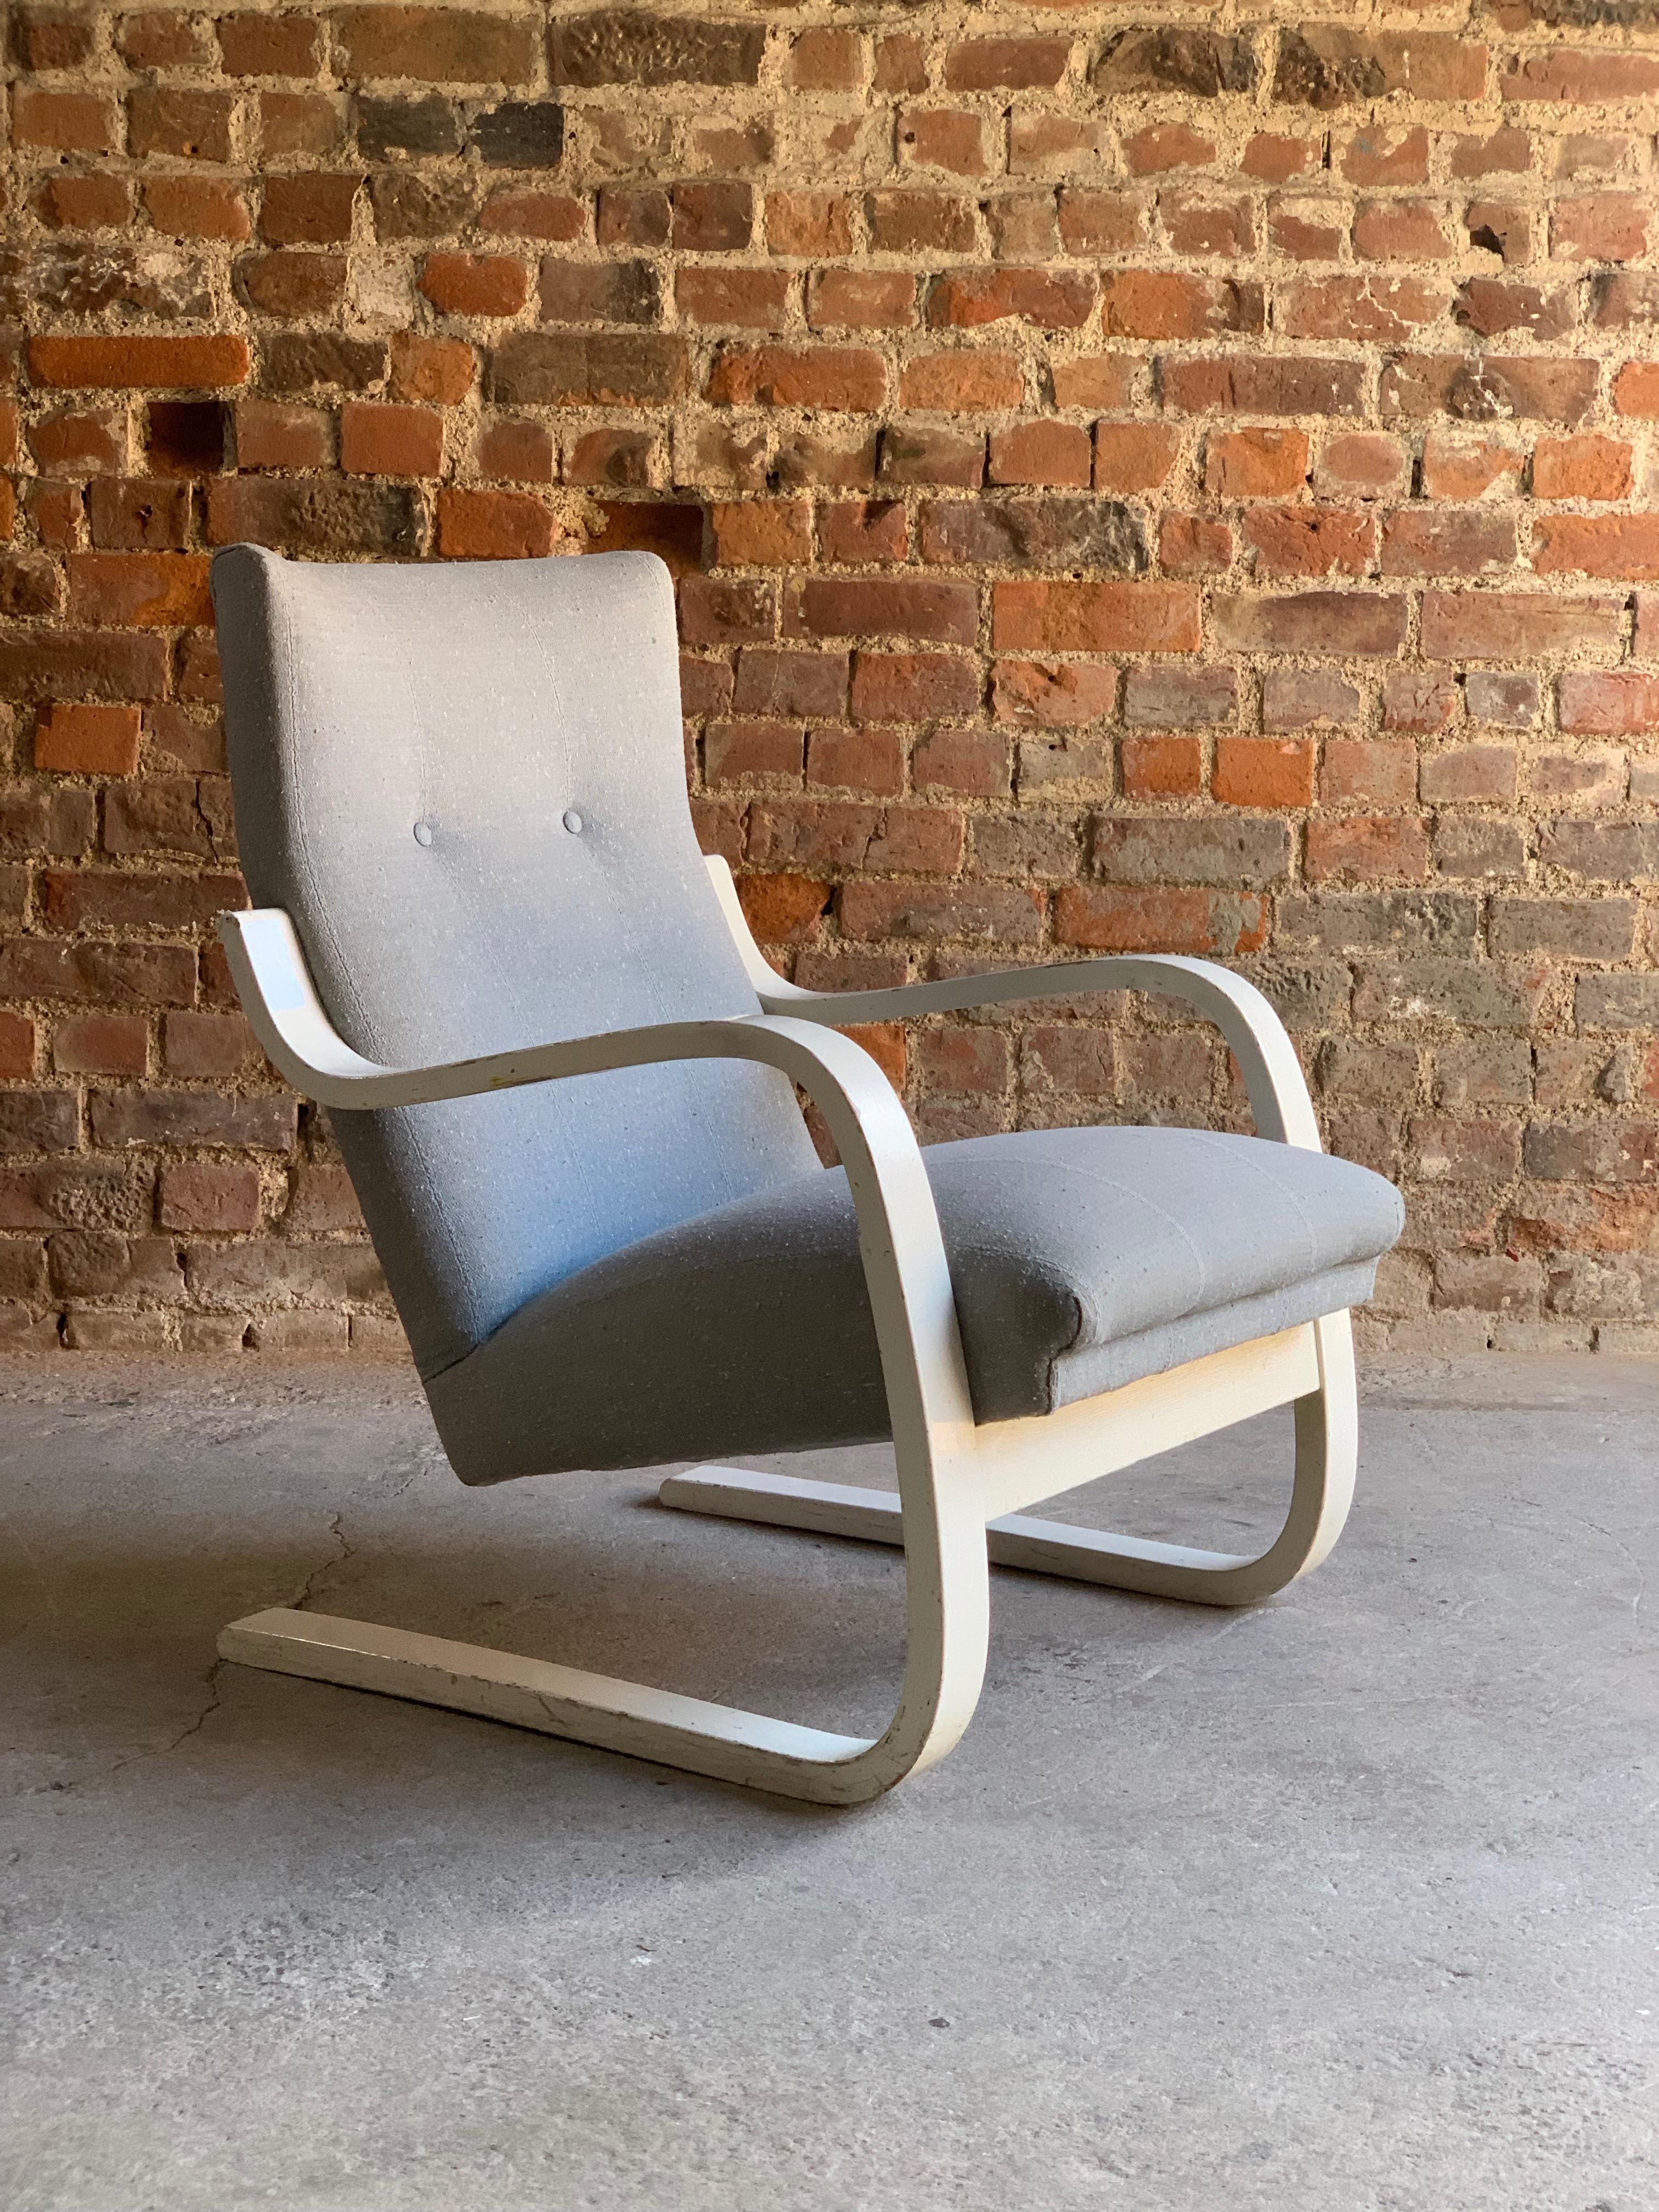 Alvar Aalto Model 401 lounge chair armchair by Artek circa 1938

Rare early Alvar Aalto Series 401 cantilever chair by Artek, Finland circa 1938, the cantilevered birch ’S' shaped frame finished in white gloss with baby blue upholstery, early